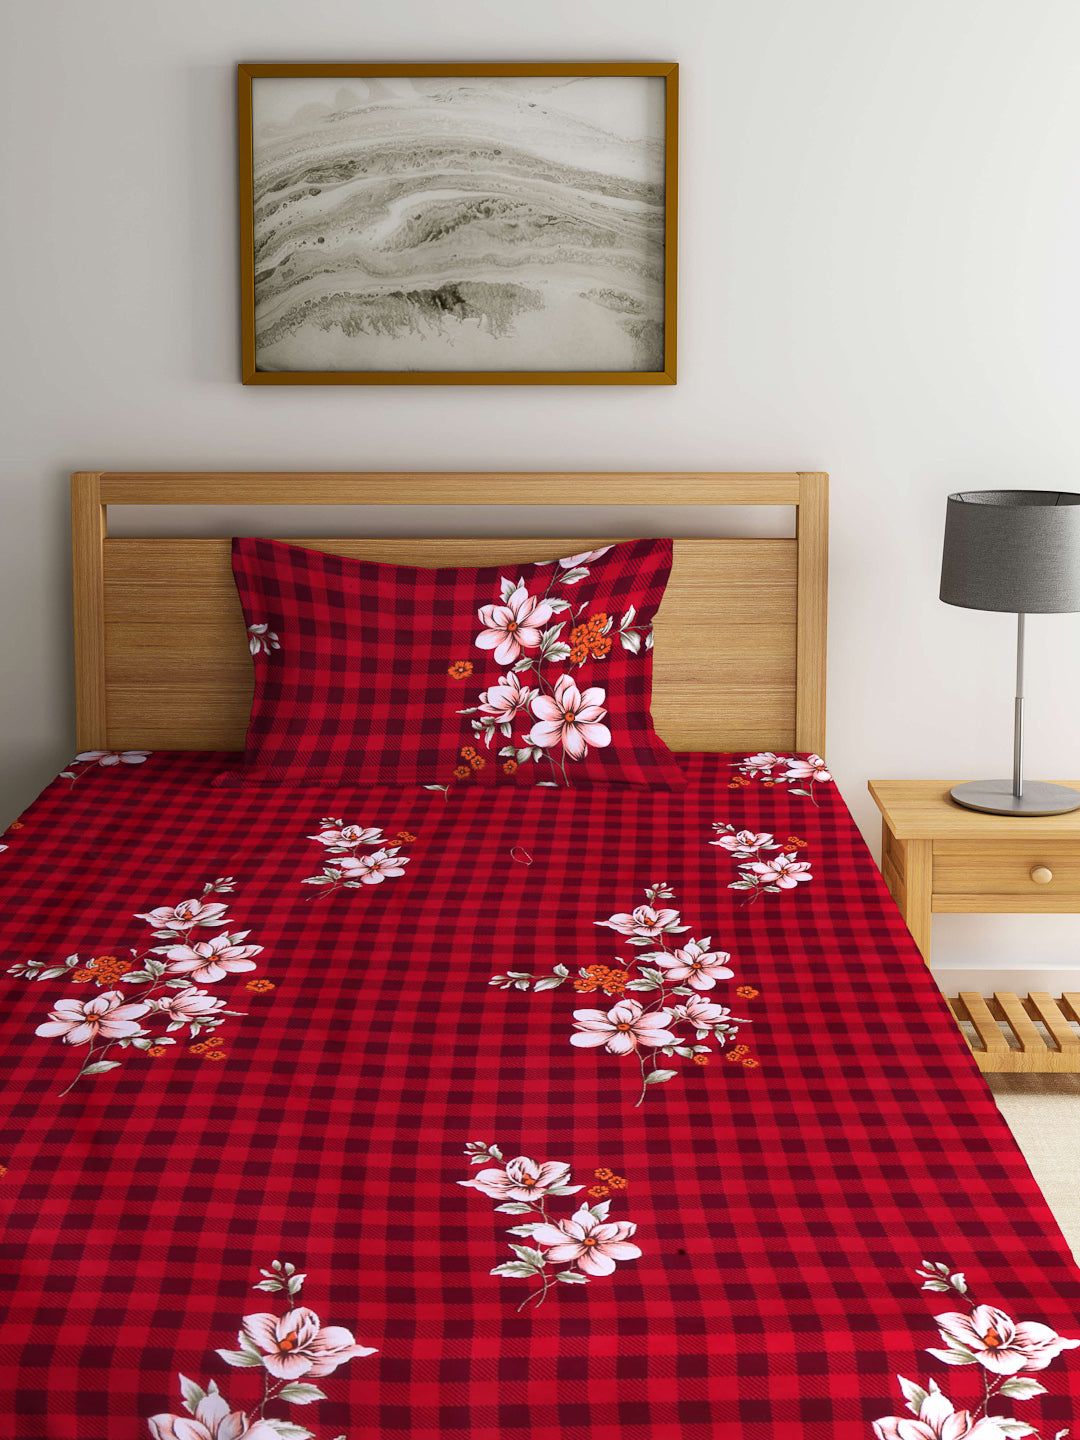 Arrabi Red Floral TC Cotton Blend Single Size Fitted Bedsheet with 1 Pillow Cover (220 X 150 cm)